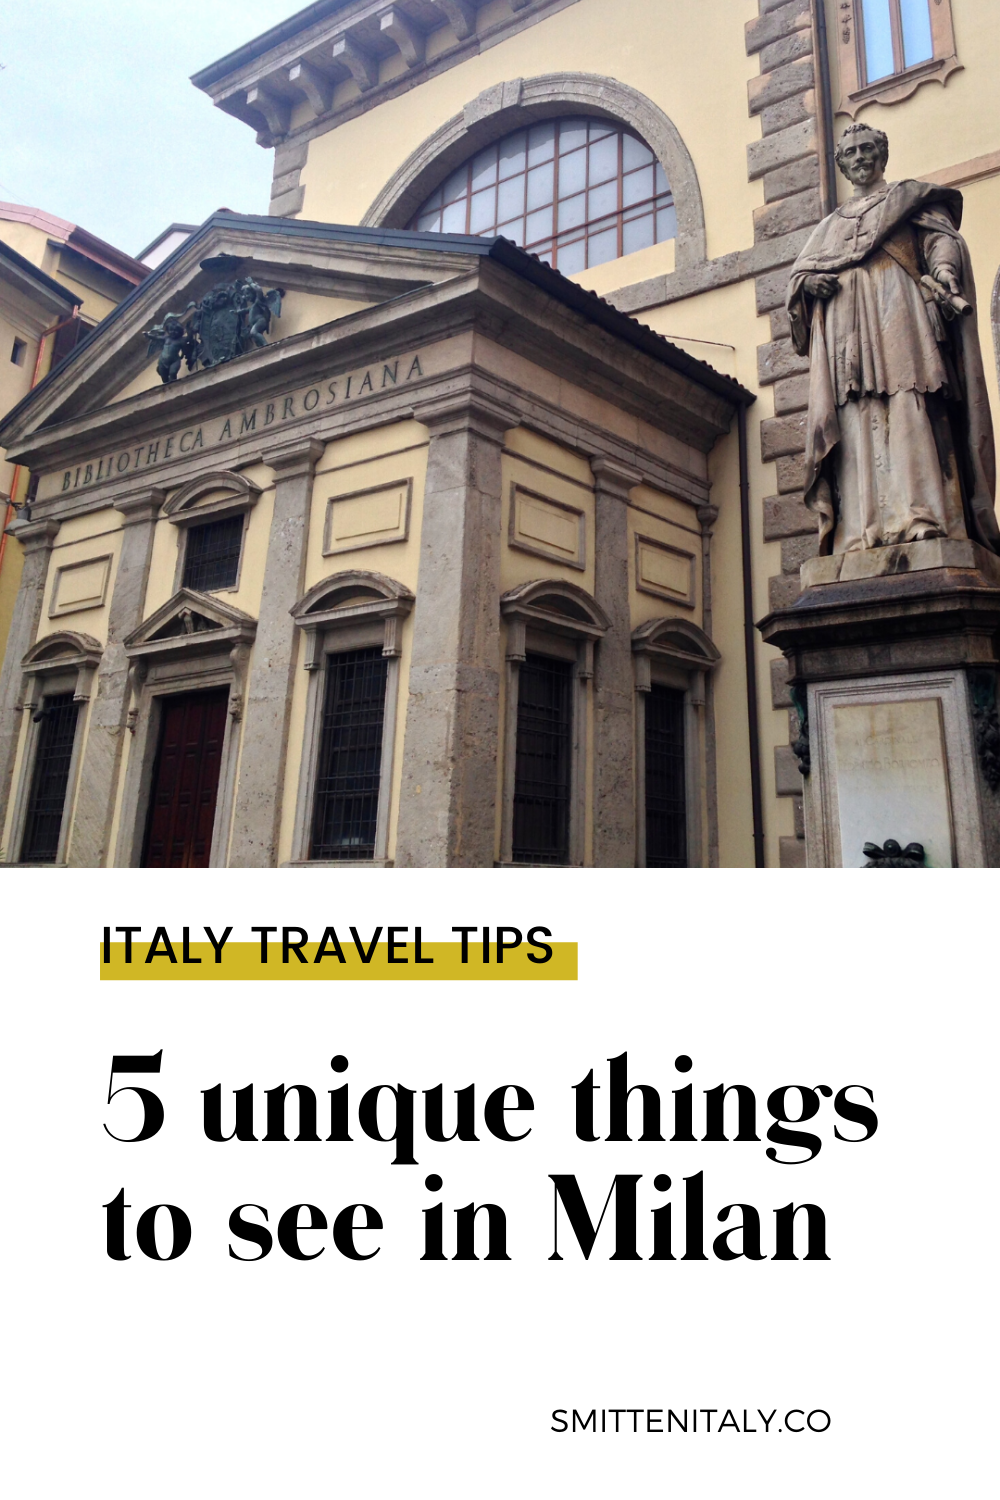 Beyond the Duomo: 5 unique things to see in Milan. 2